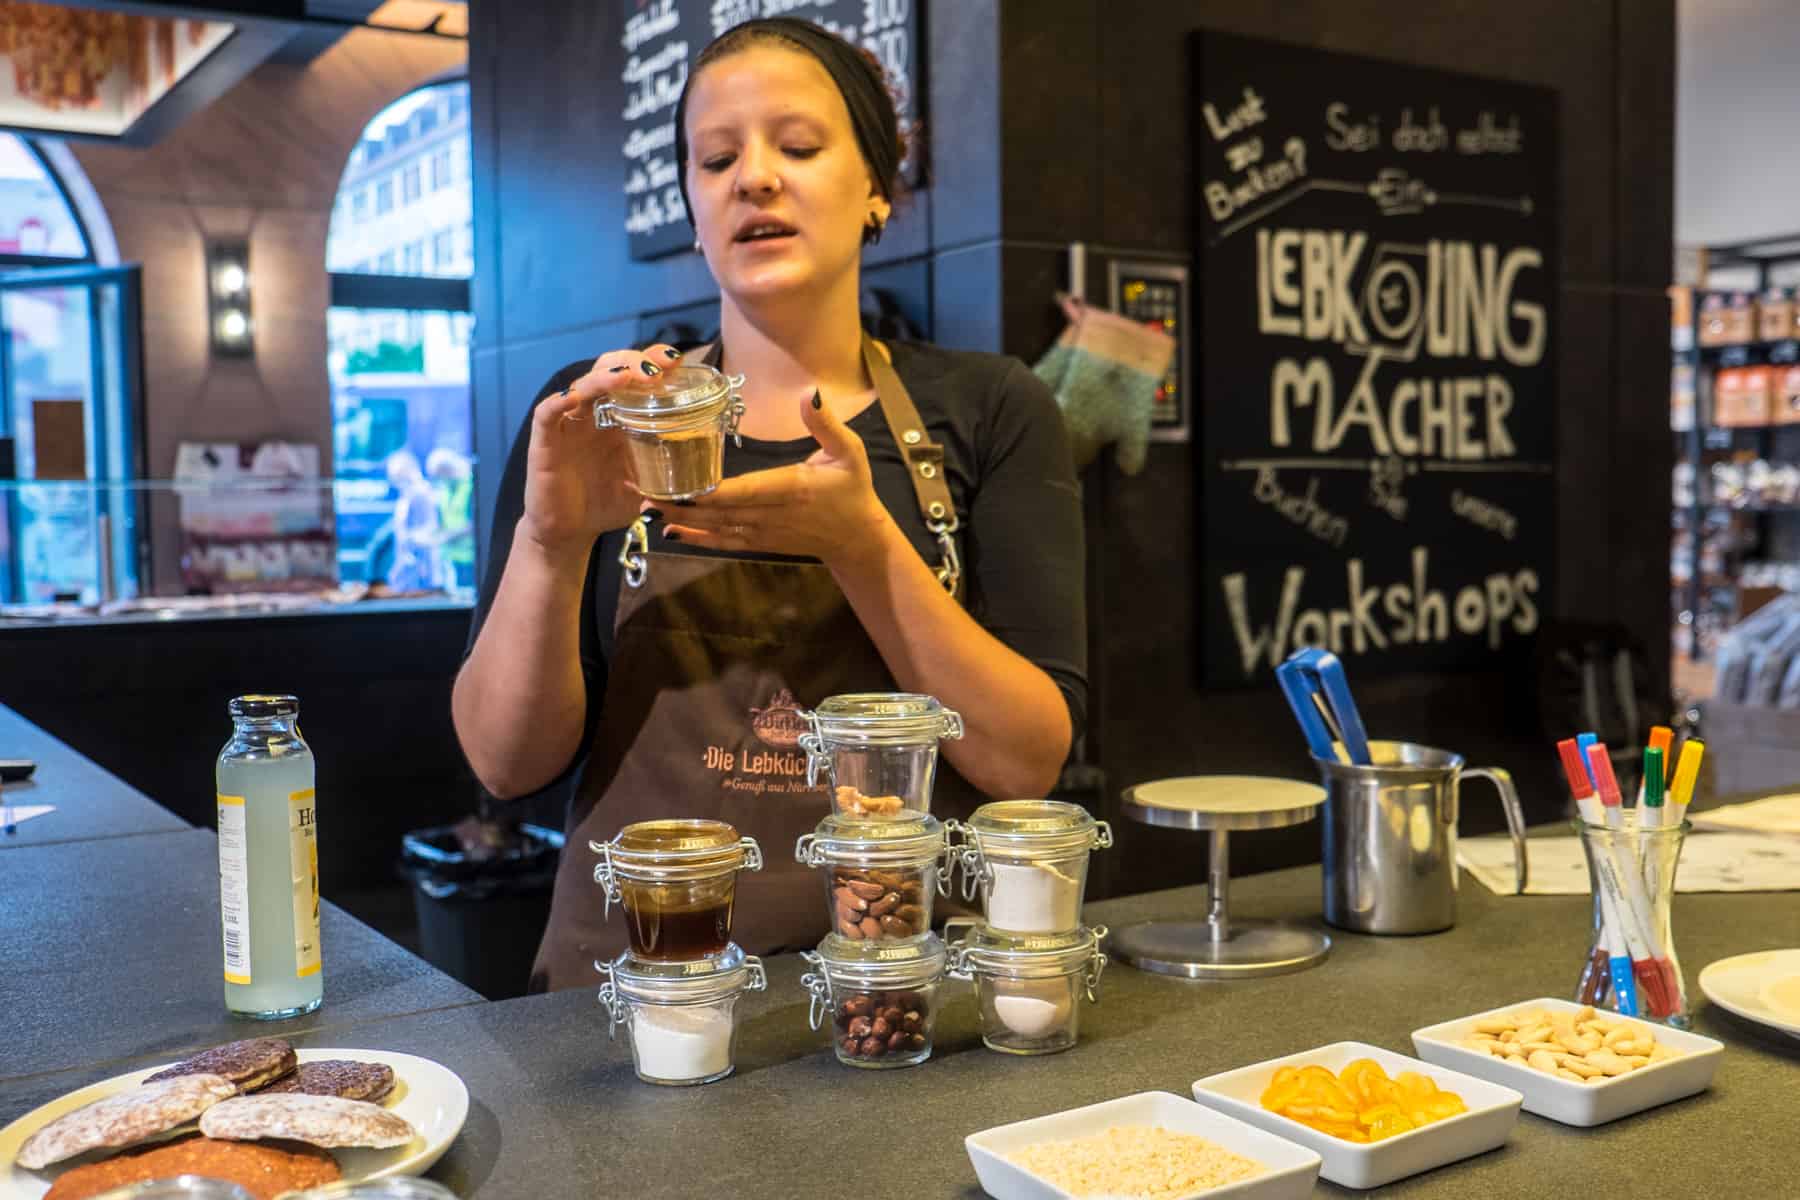 A woman at the Wicklein Lebkuchen in Nuremberg gives a baking glass and is explaining the different spices in each jar. The final result, baked gingerbread can be seen on the left